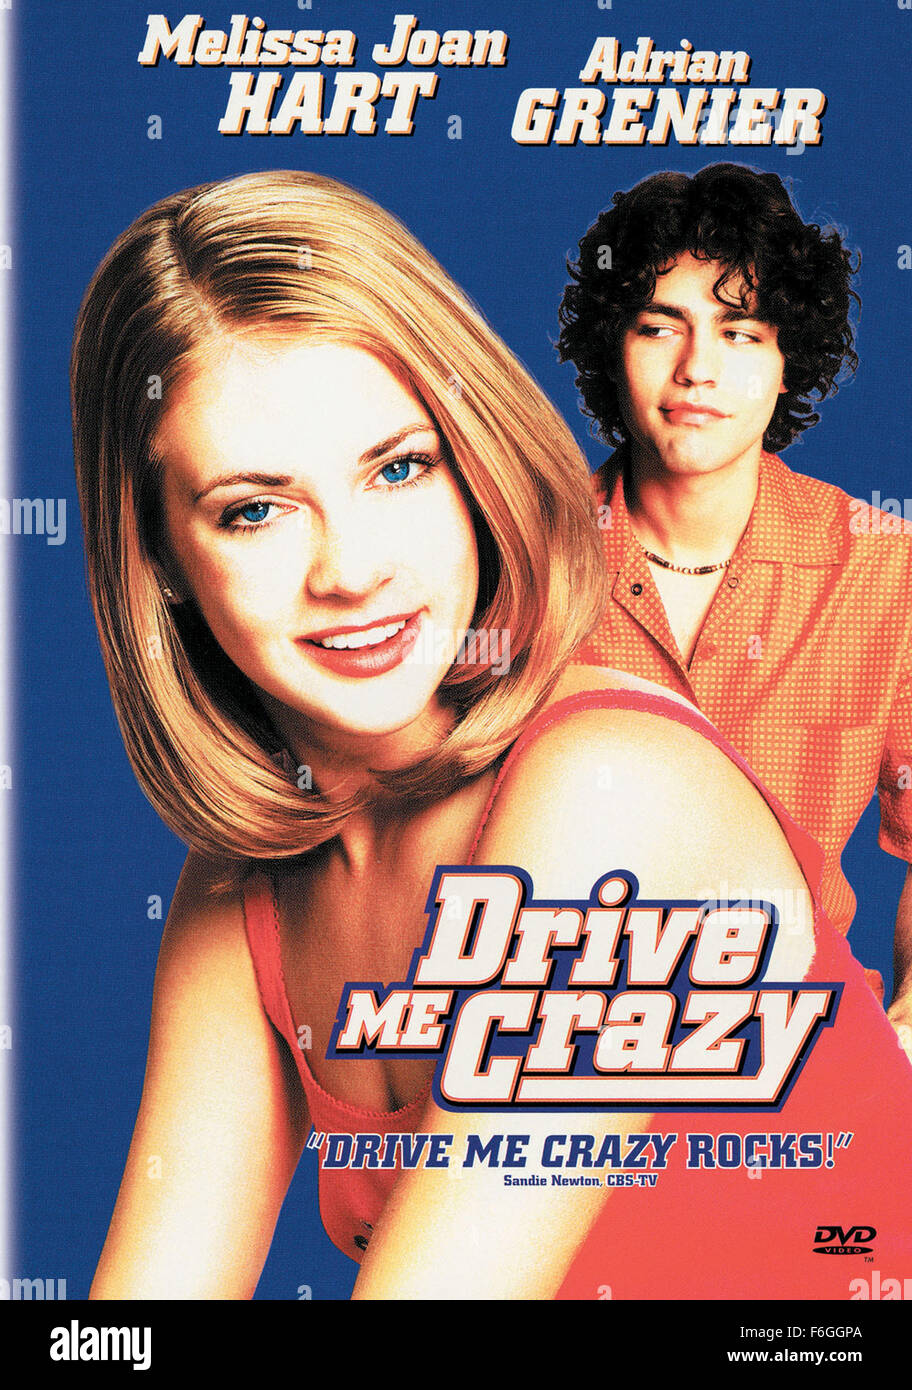 Oct 01, 1999; Los Angeles, CA, USA; Poster art for the Grand March Productions romantic comedy, 'Drive Me Crazy,' starring MELISSA JOAN HART as Nicole Maris and ADRIAN GRENIER as Chase Hammond. Directed by John Schultz. Mandatory Credit: Photo by Grand March Productions. (c) Copyright 1999 by Courtesy of Grand March Productions Stock Photo